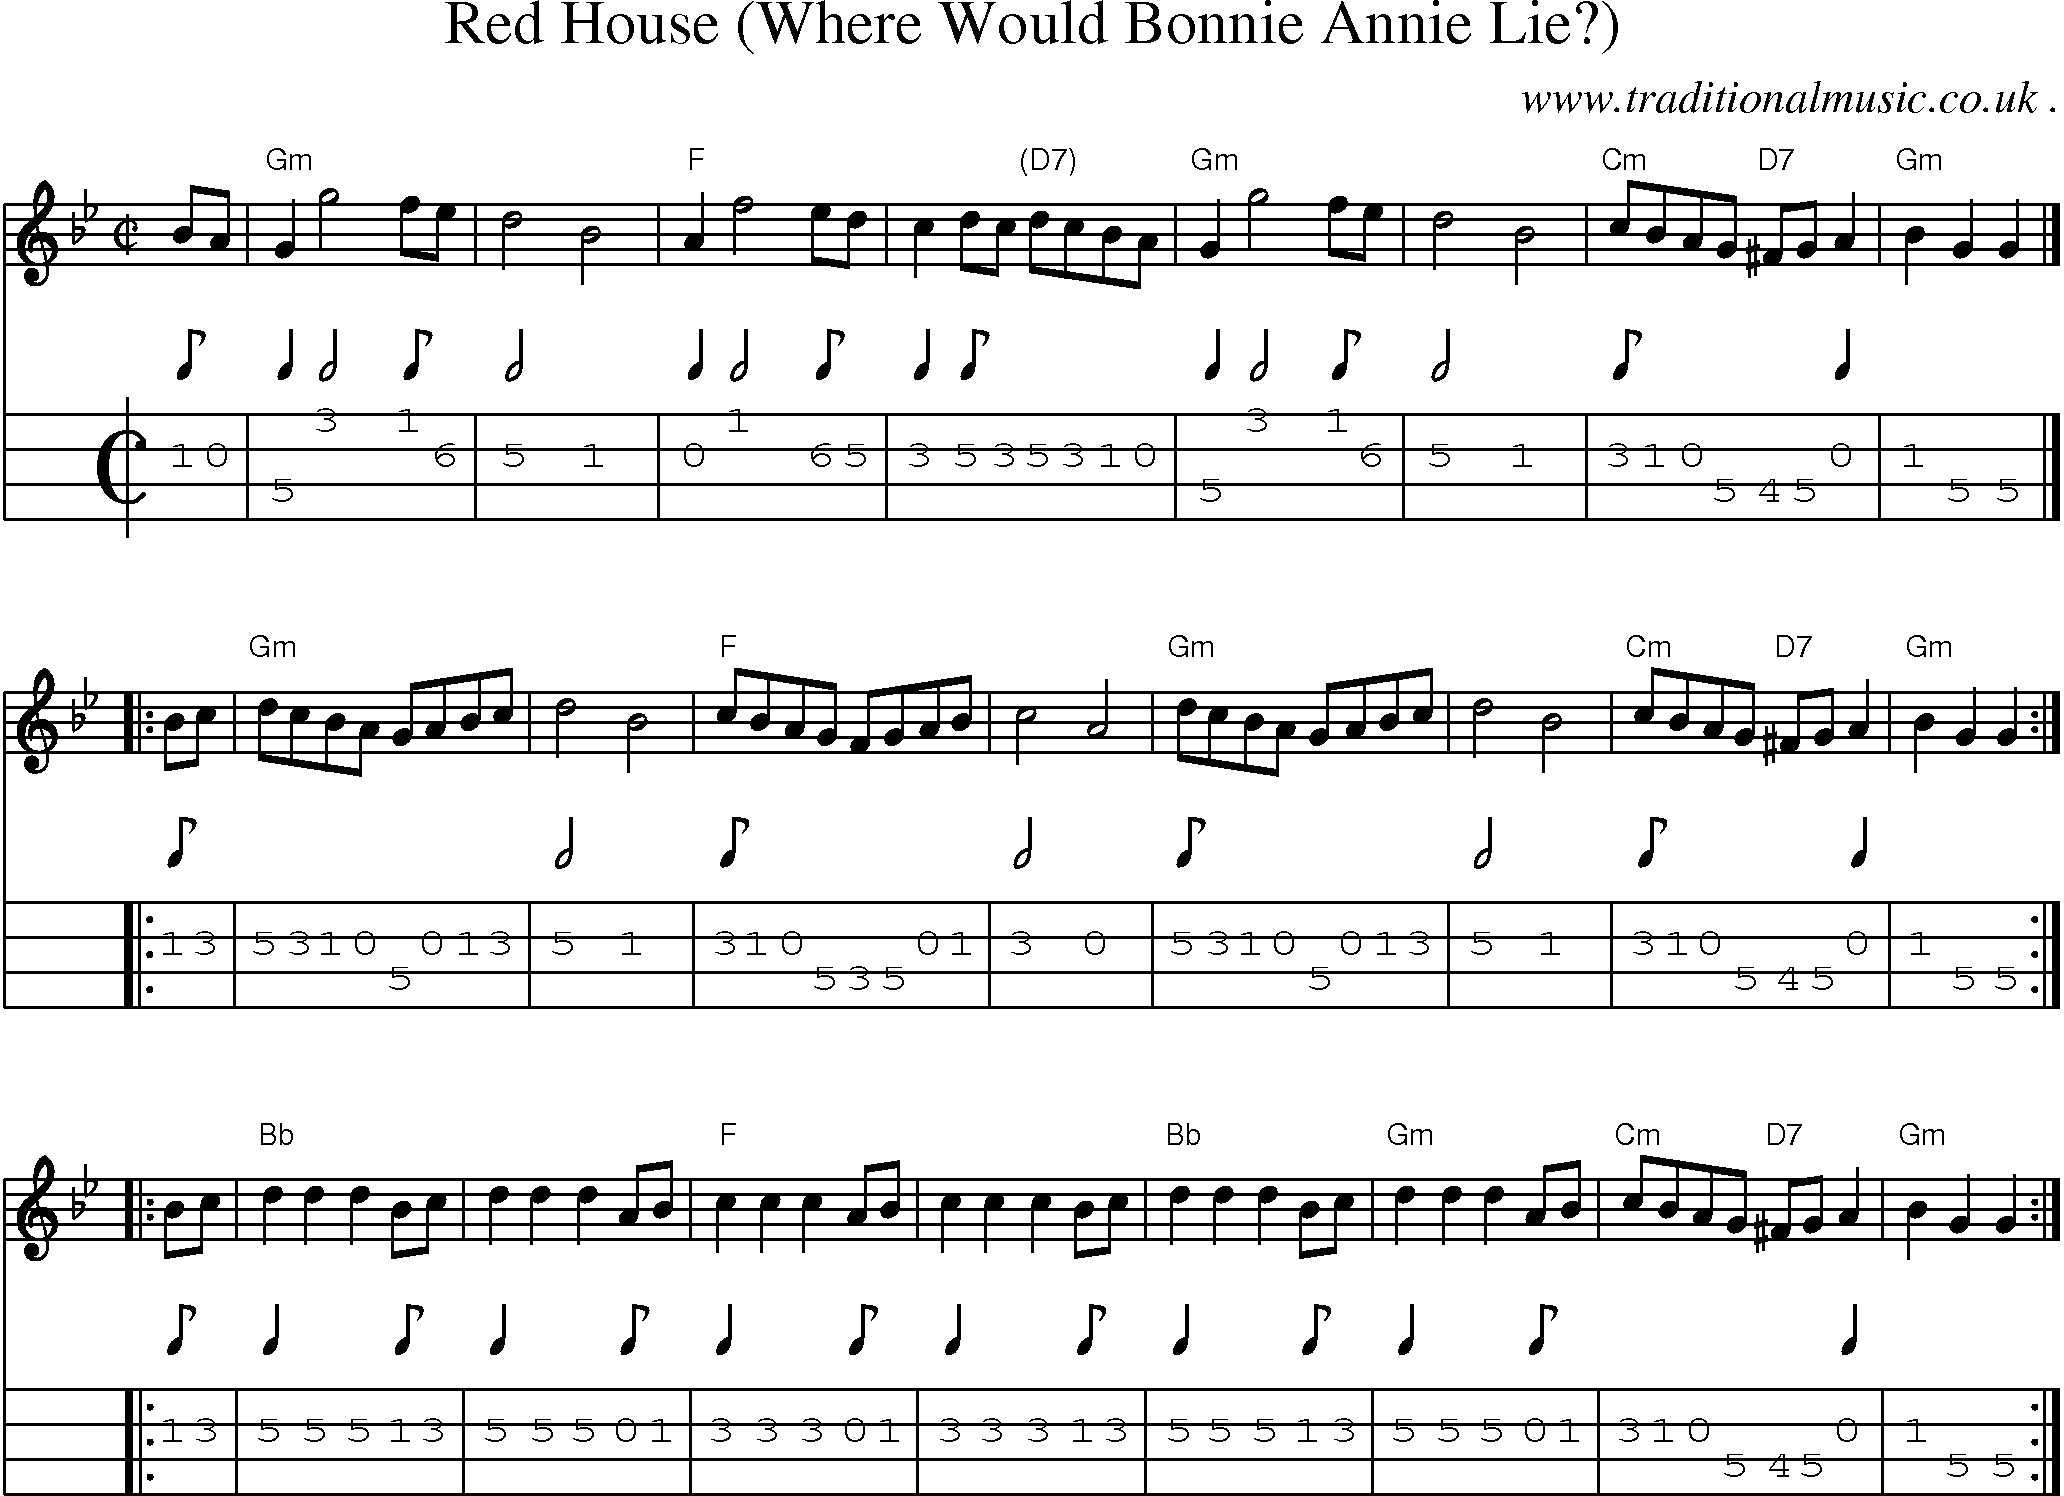 Sheet-music  score, Chords and Mandolin Tabs for Red House Where Would Bonnie Annie Lie